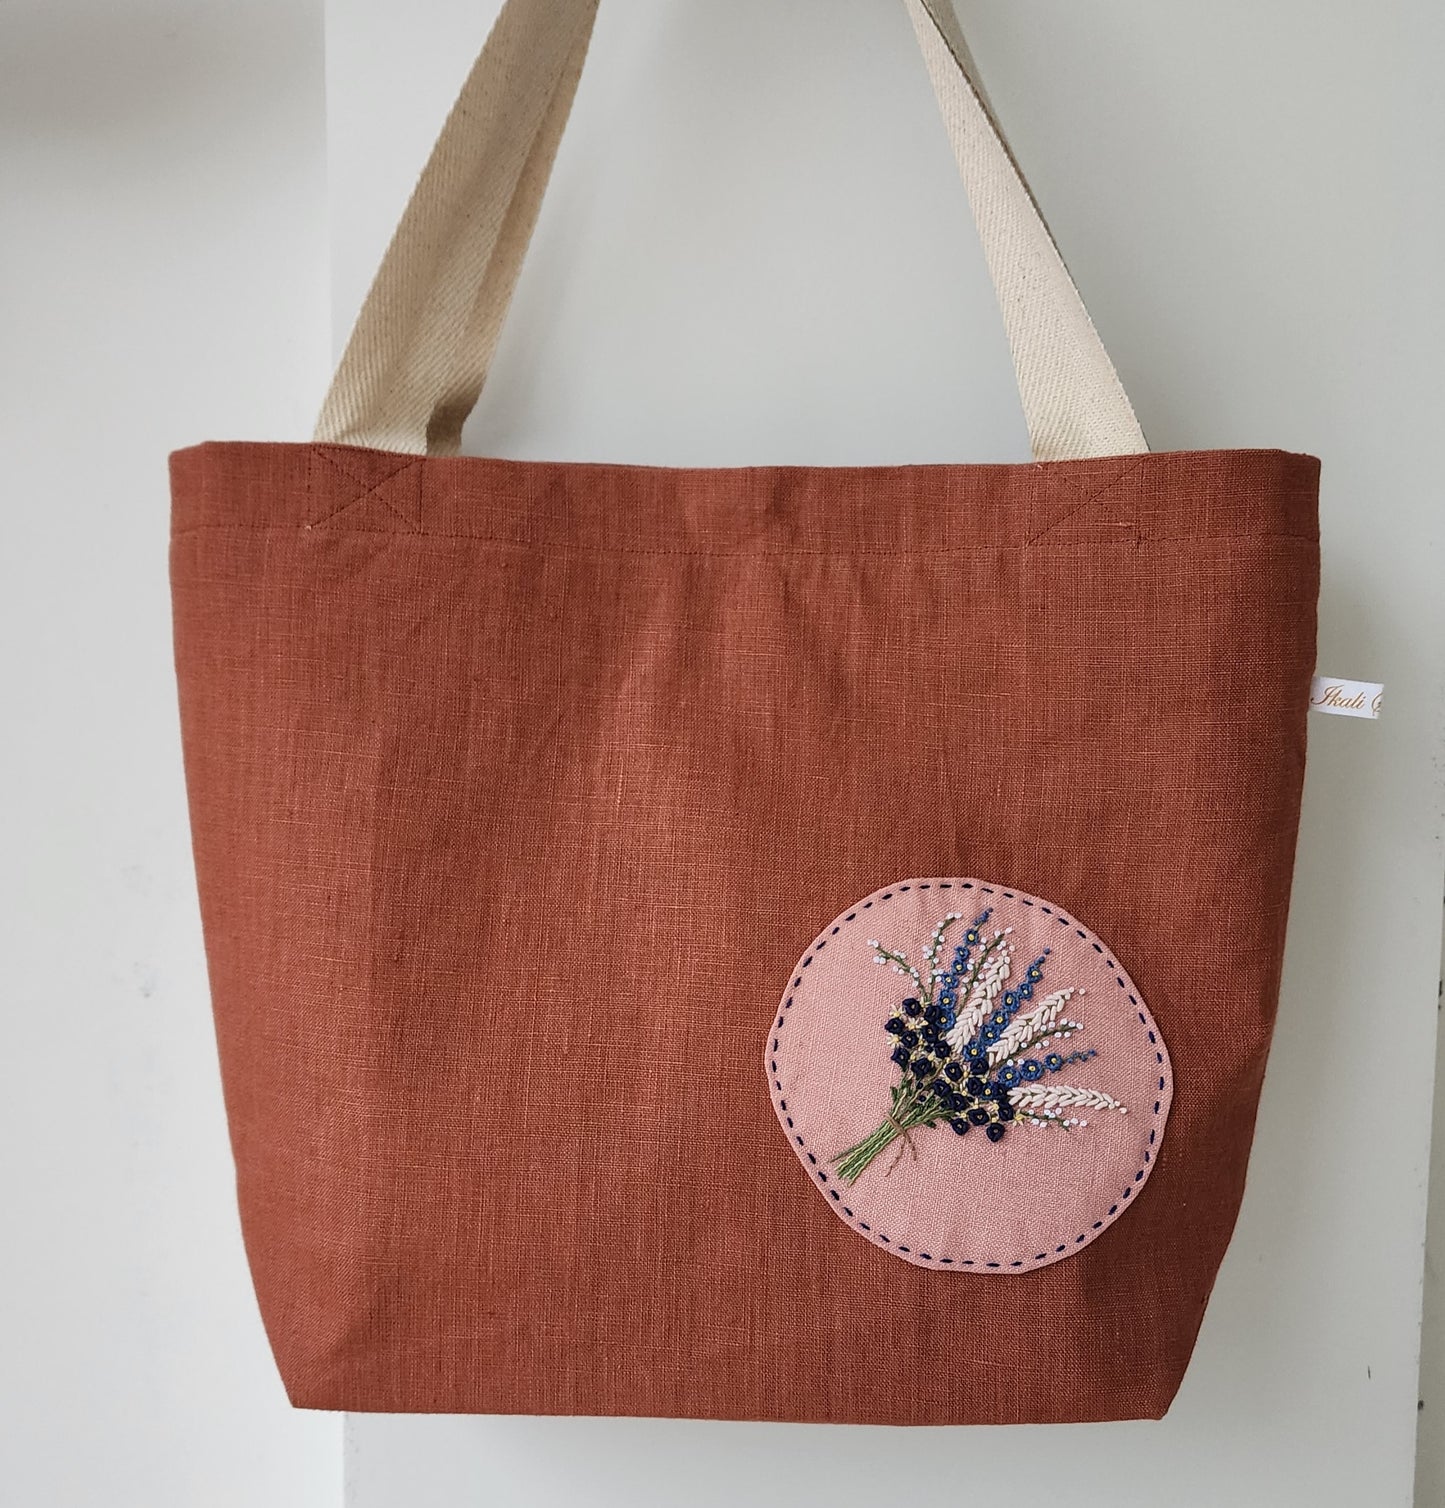 Ikali - Blue Bouquet - Hand-embroidered Tote